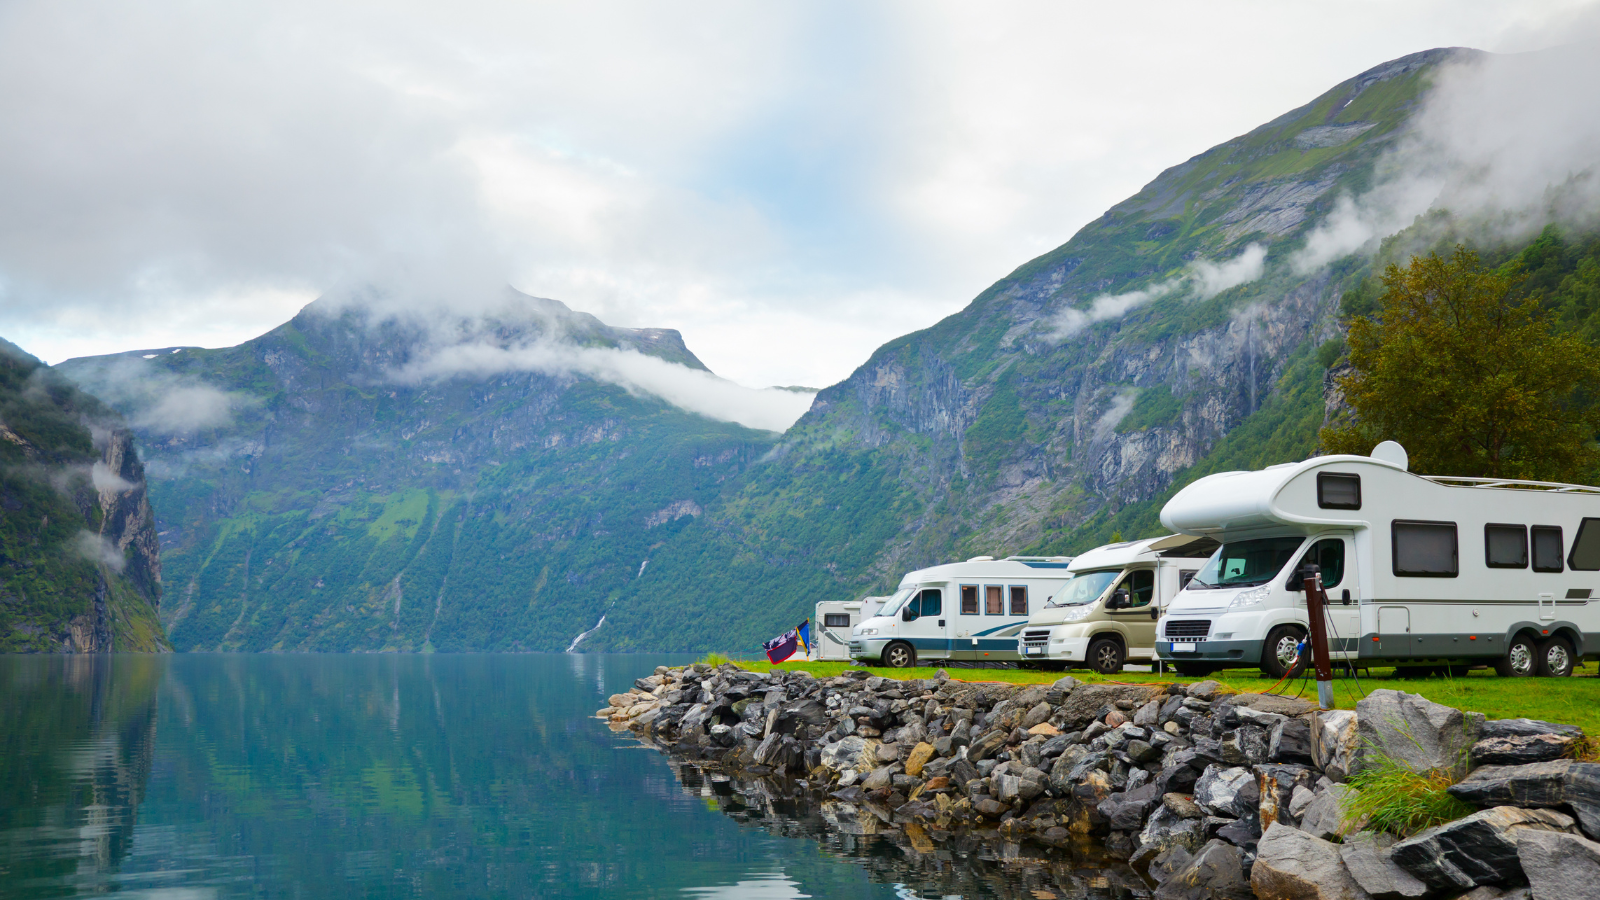 The first thing in the list of 10 best things to do in Norway - Explore the beauty of Geirangerfjord